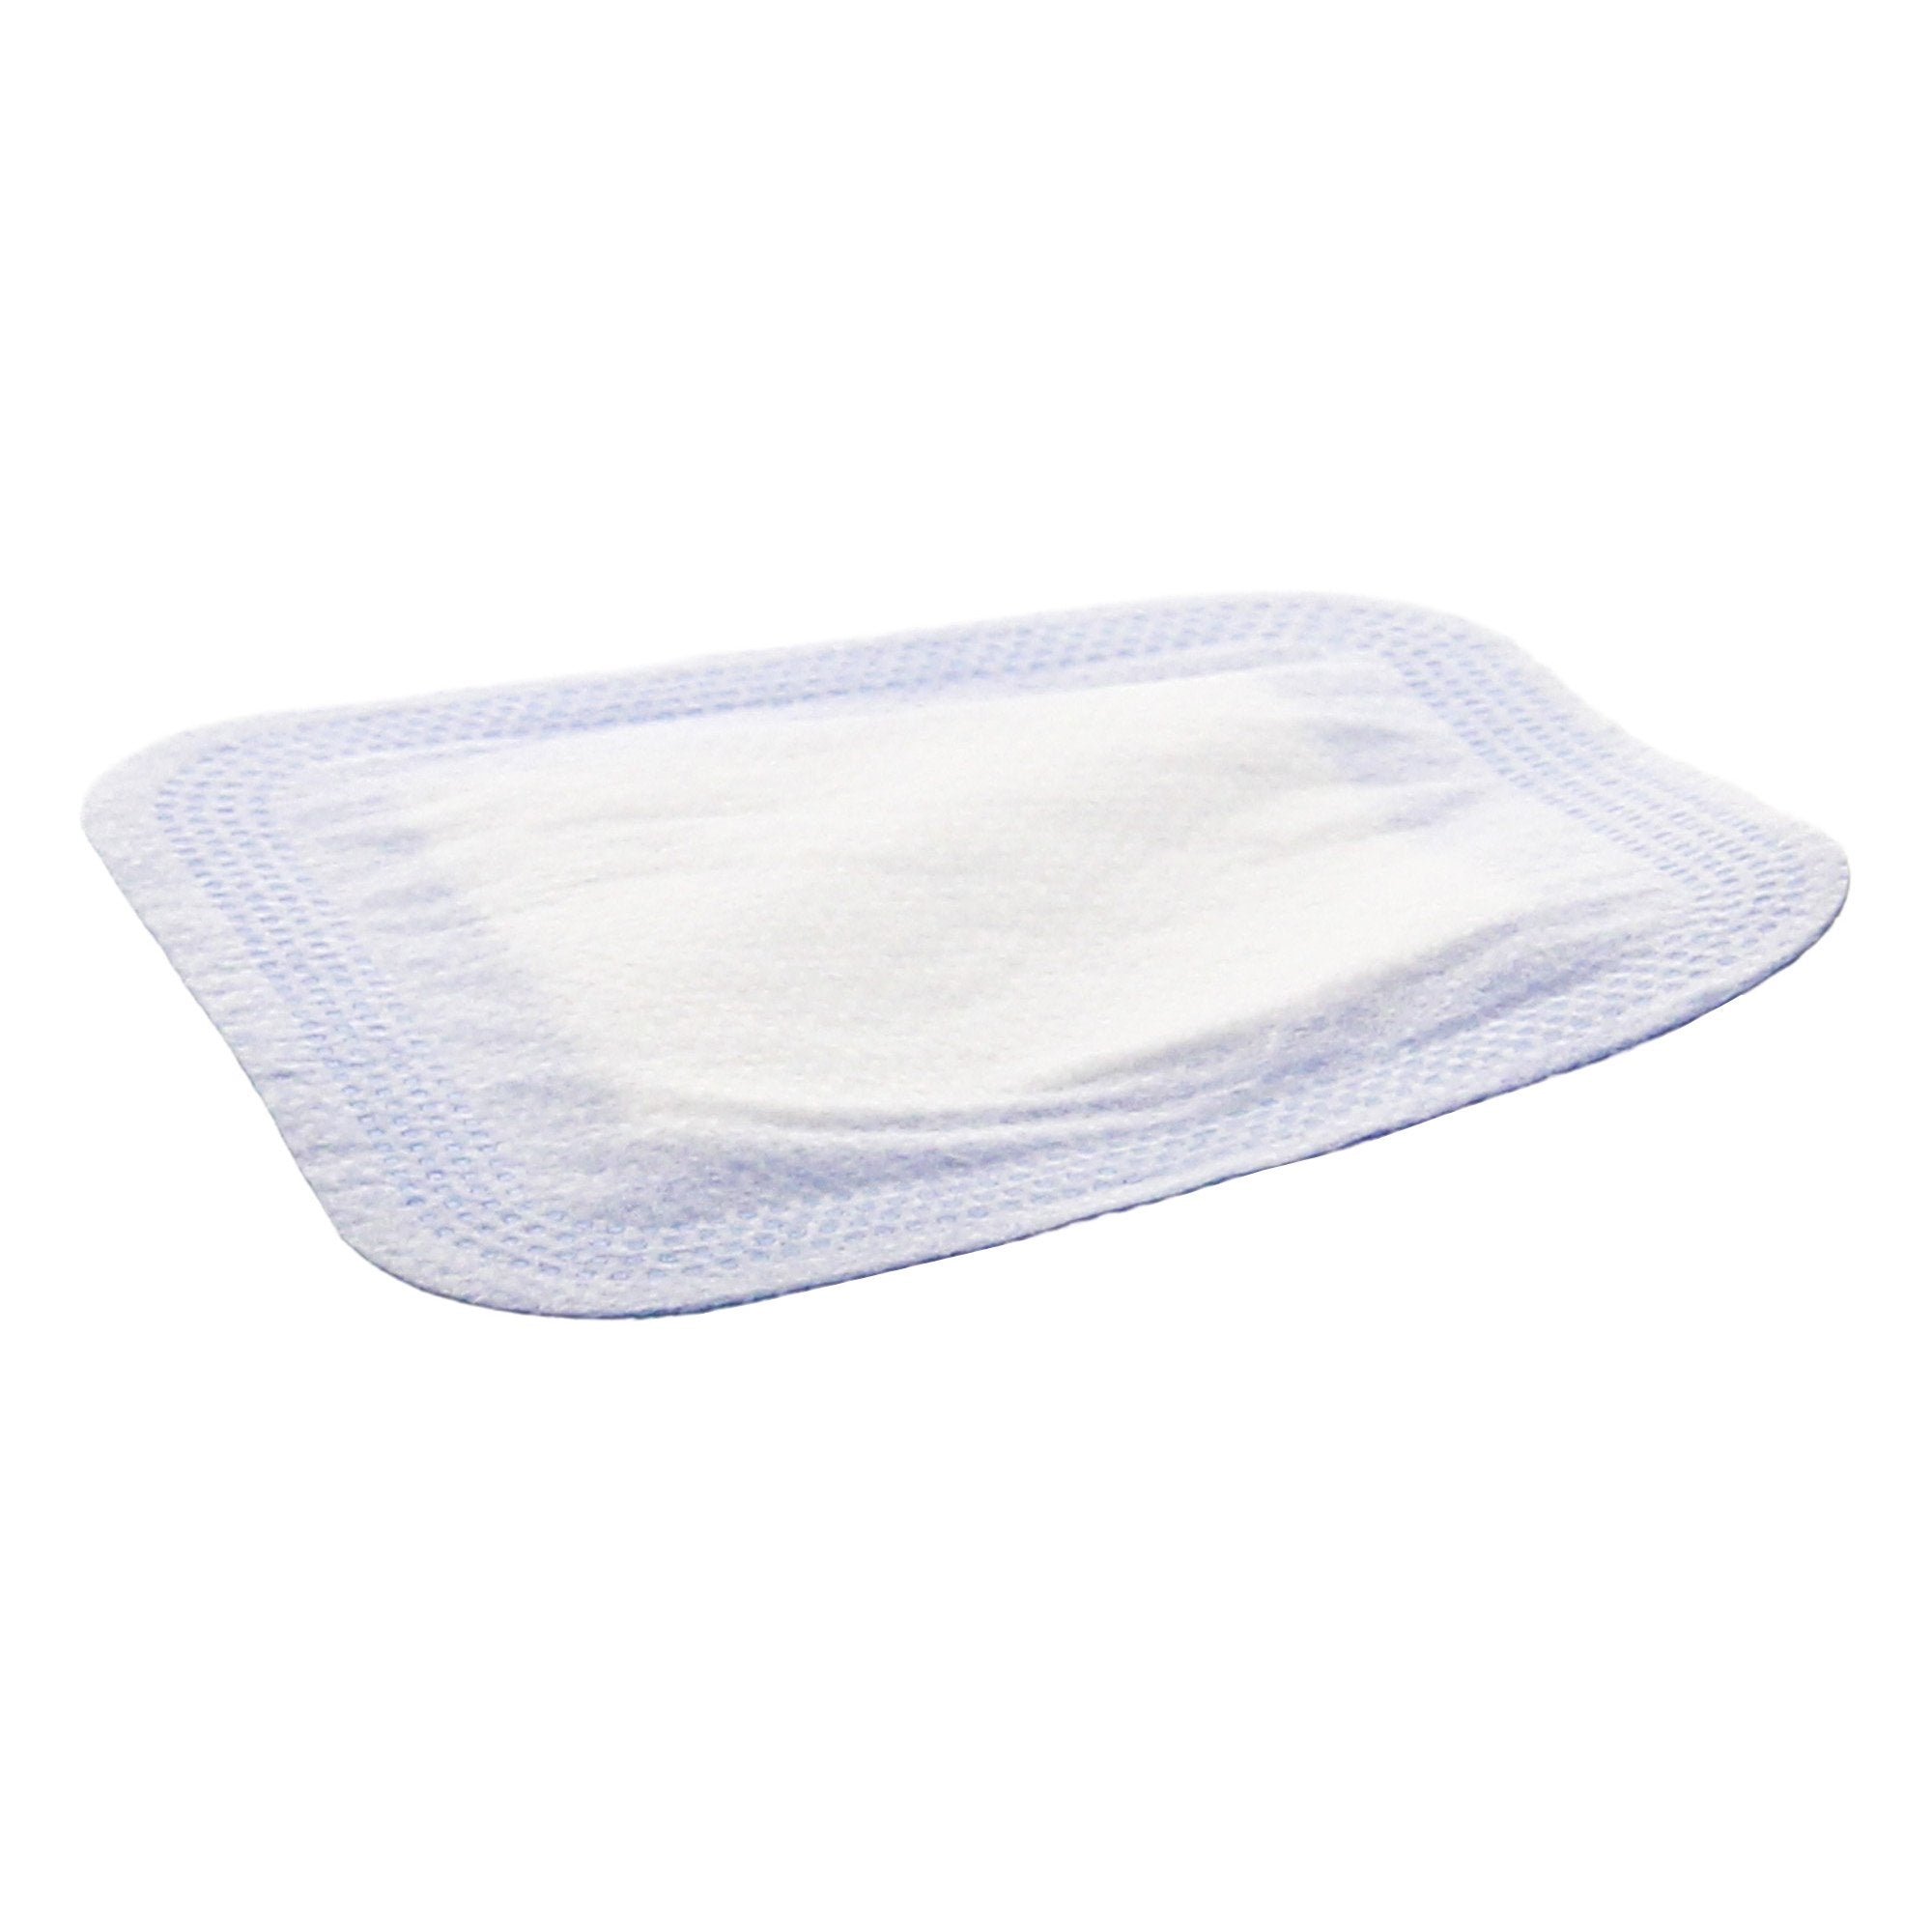 Super Absorbent Dressing HydraLock™ SA 3 X 3 Inch Square